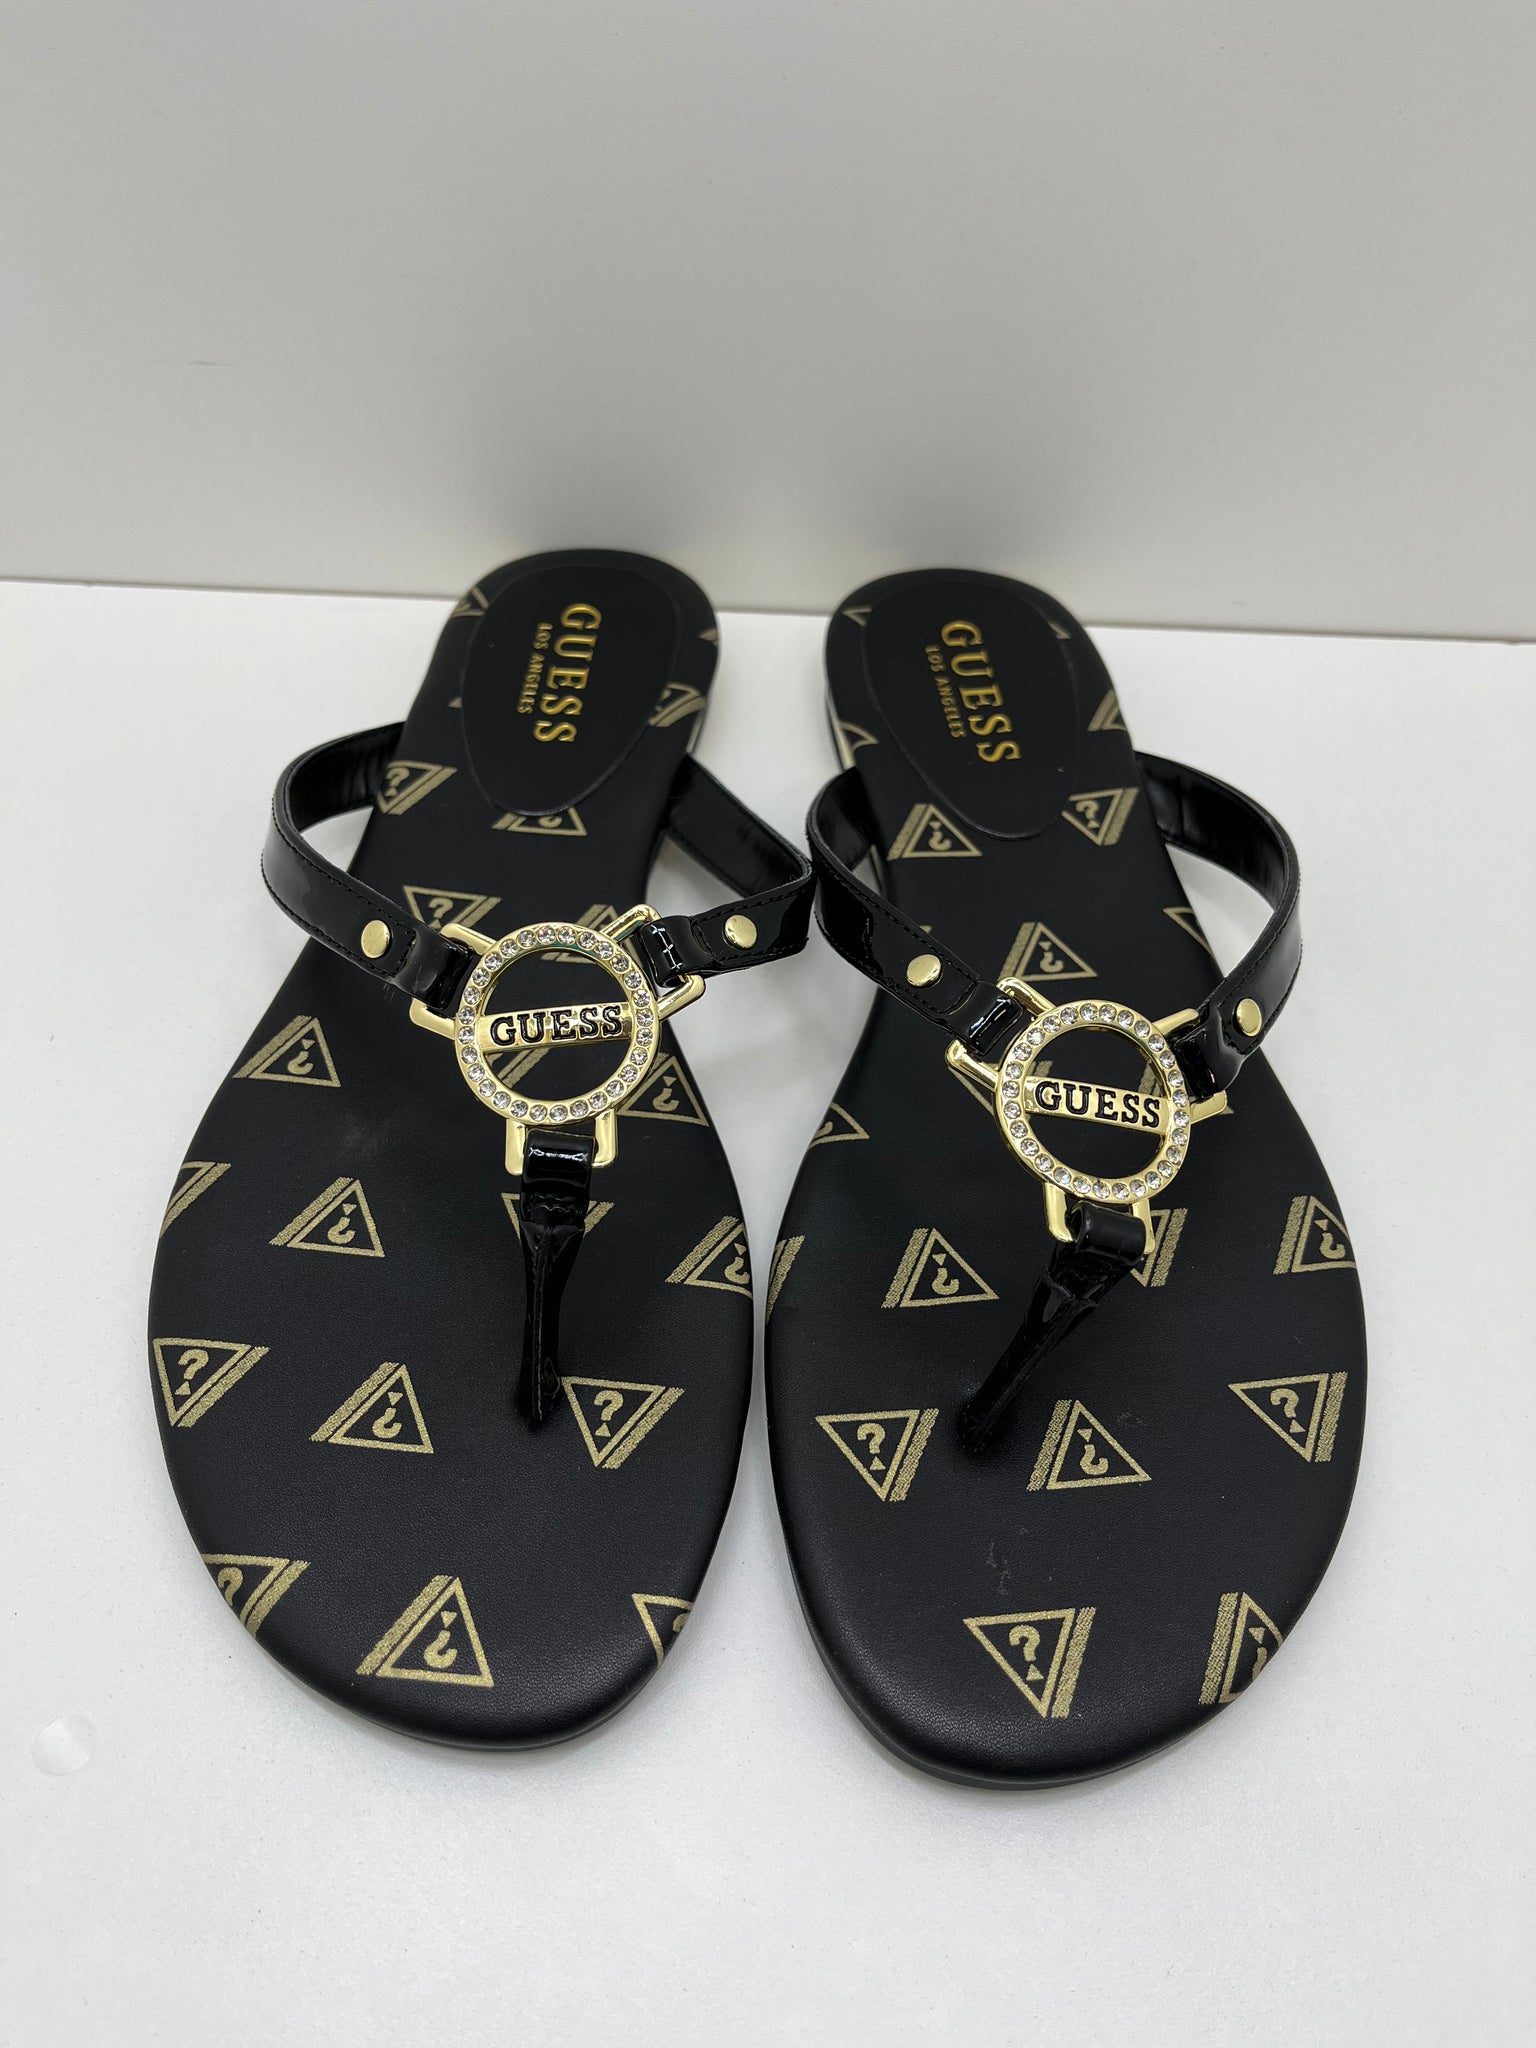 GUESS Slippers (multiple sizes)